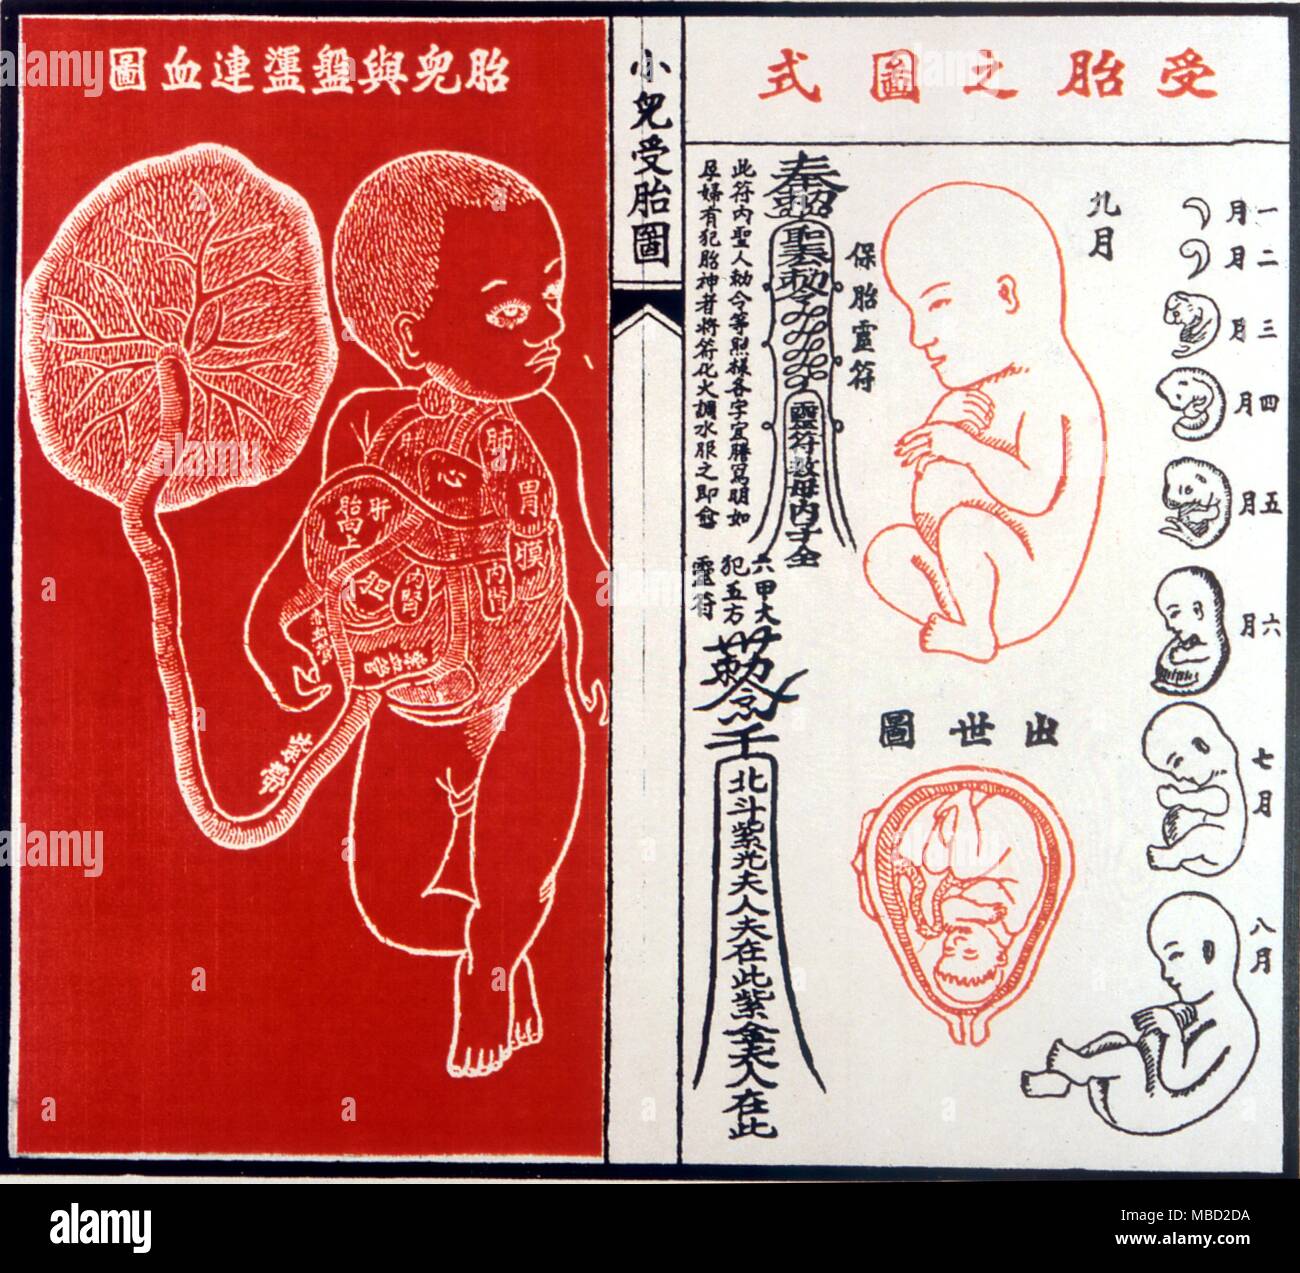 Chinese Medicine. Woodcut showing the different sizes of the growing embryo in the womb. Stock Photo